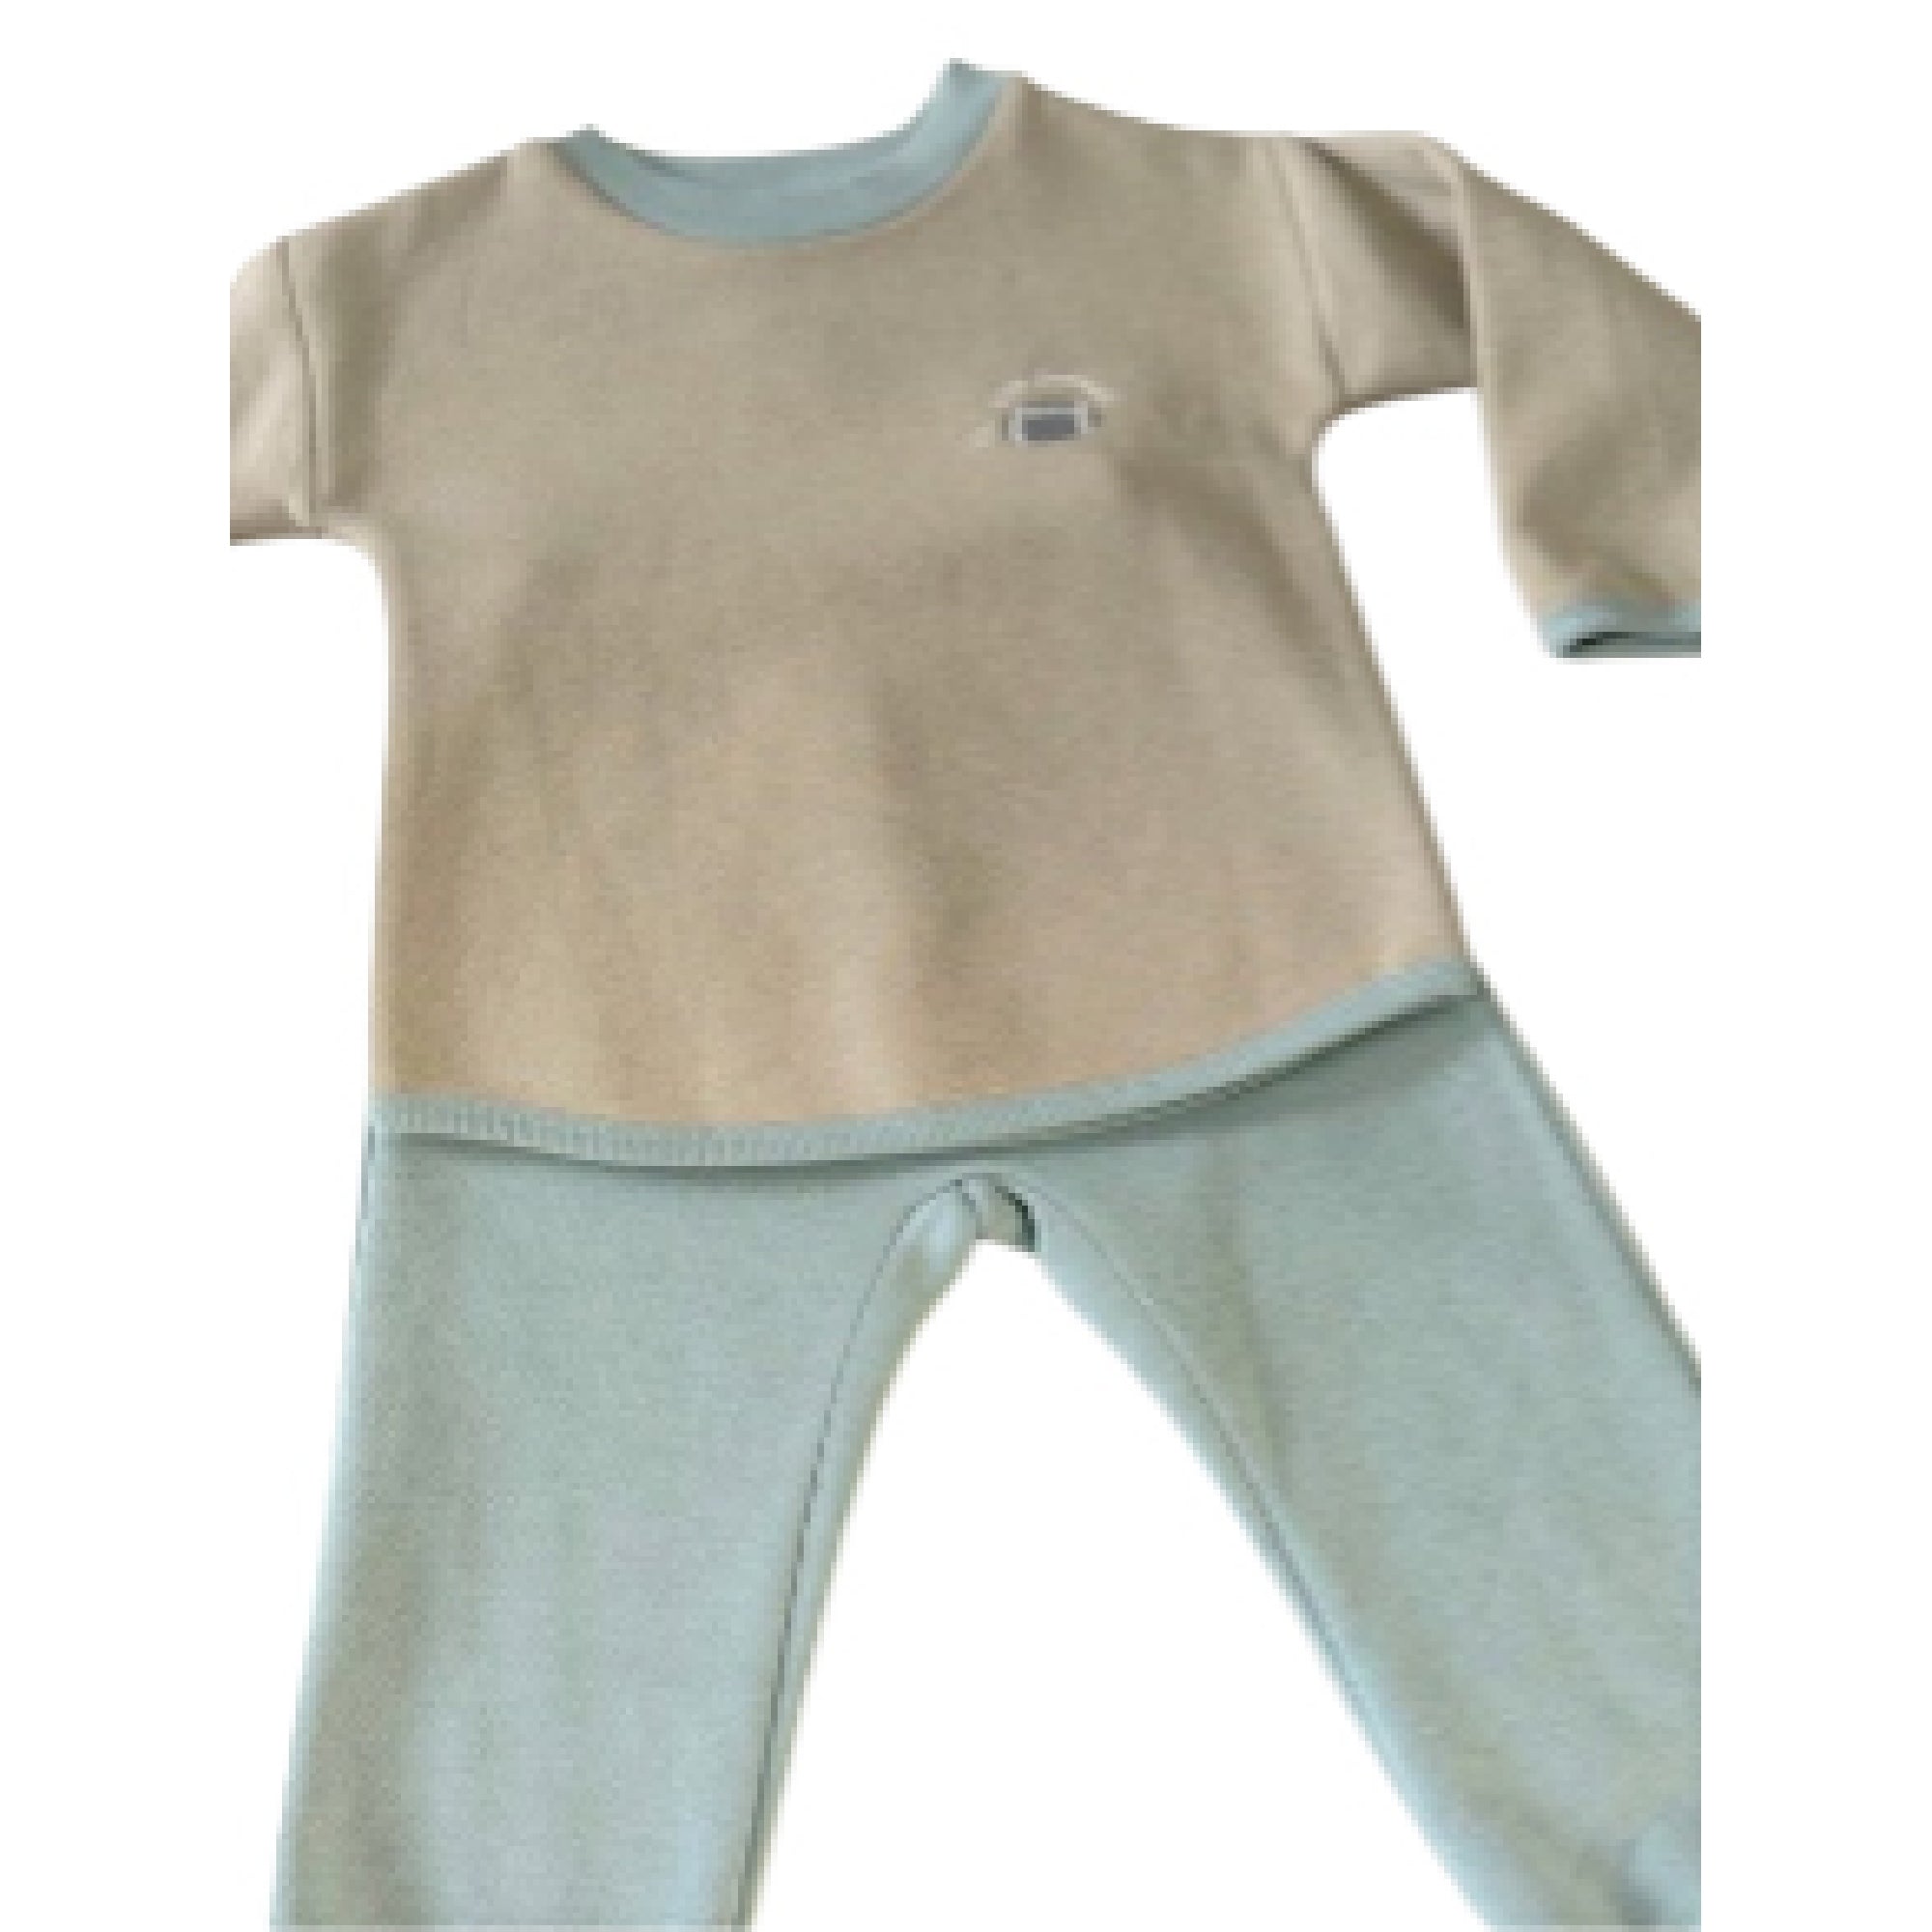 Infant & Toddler Sweatshirt and Sweatpants Football Themed Set for Little Boys & Girls 2 Piece Outfit - Wear Sierra